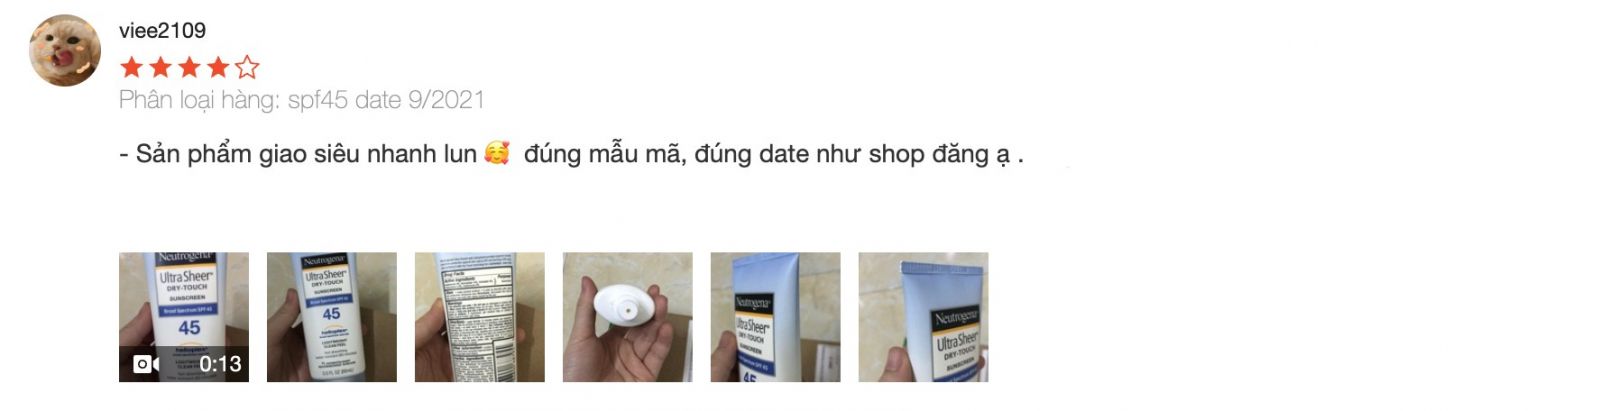 Kem chống nắng Neutrogena ultra sheer dry touch review